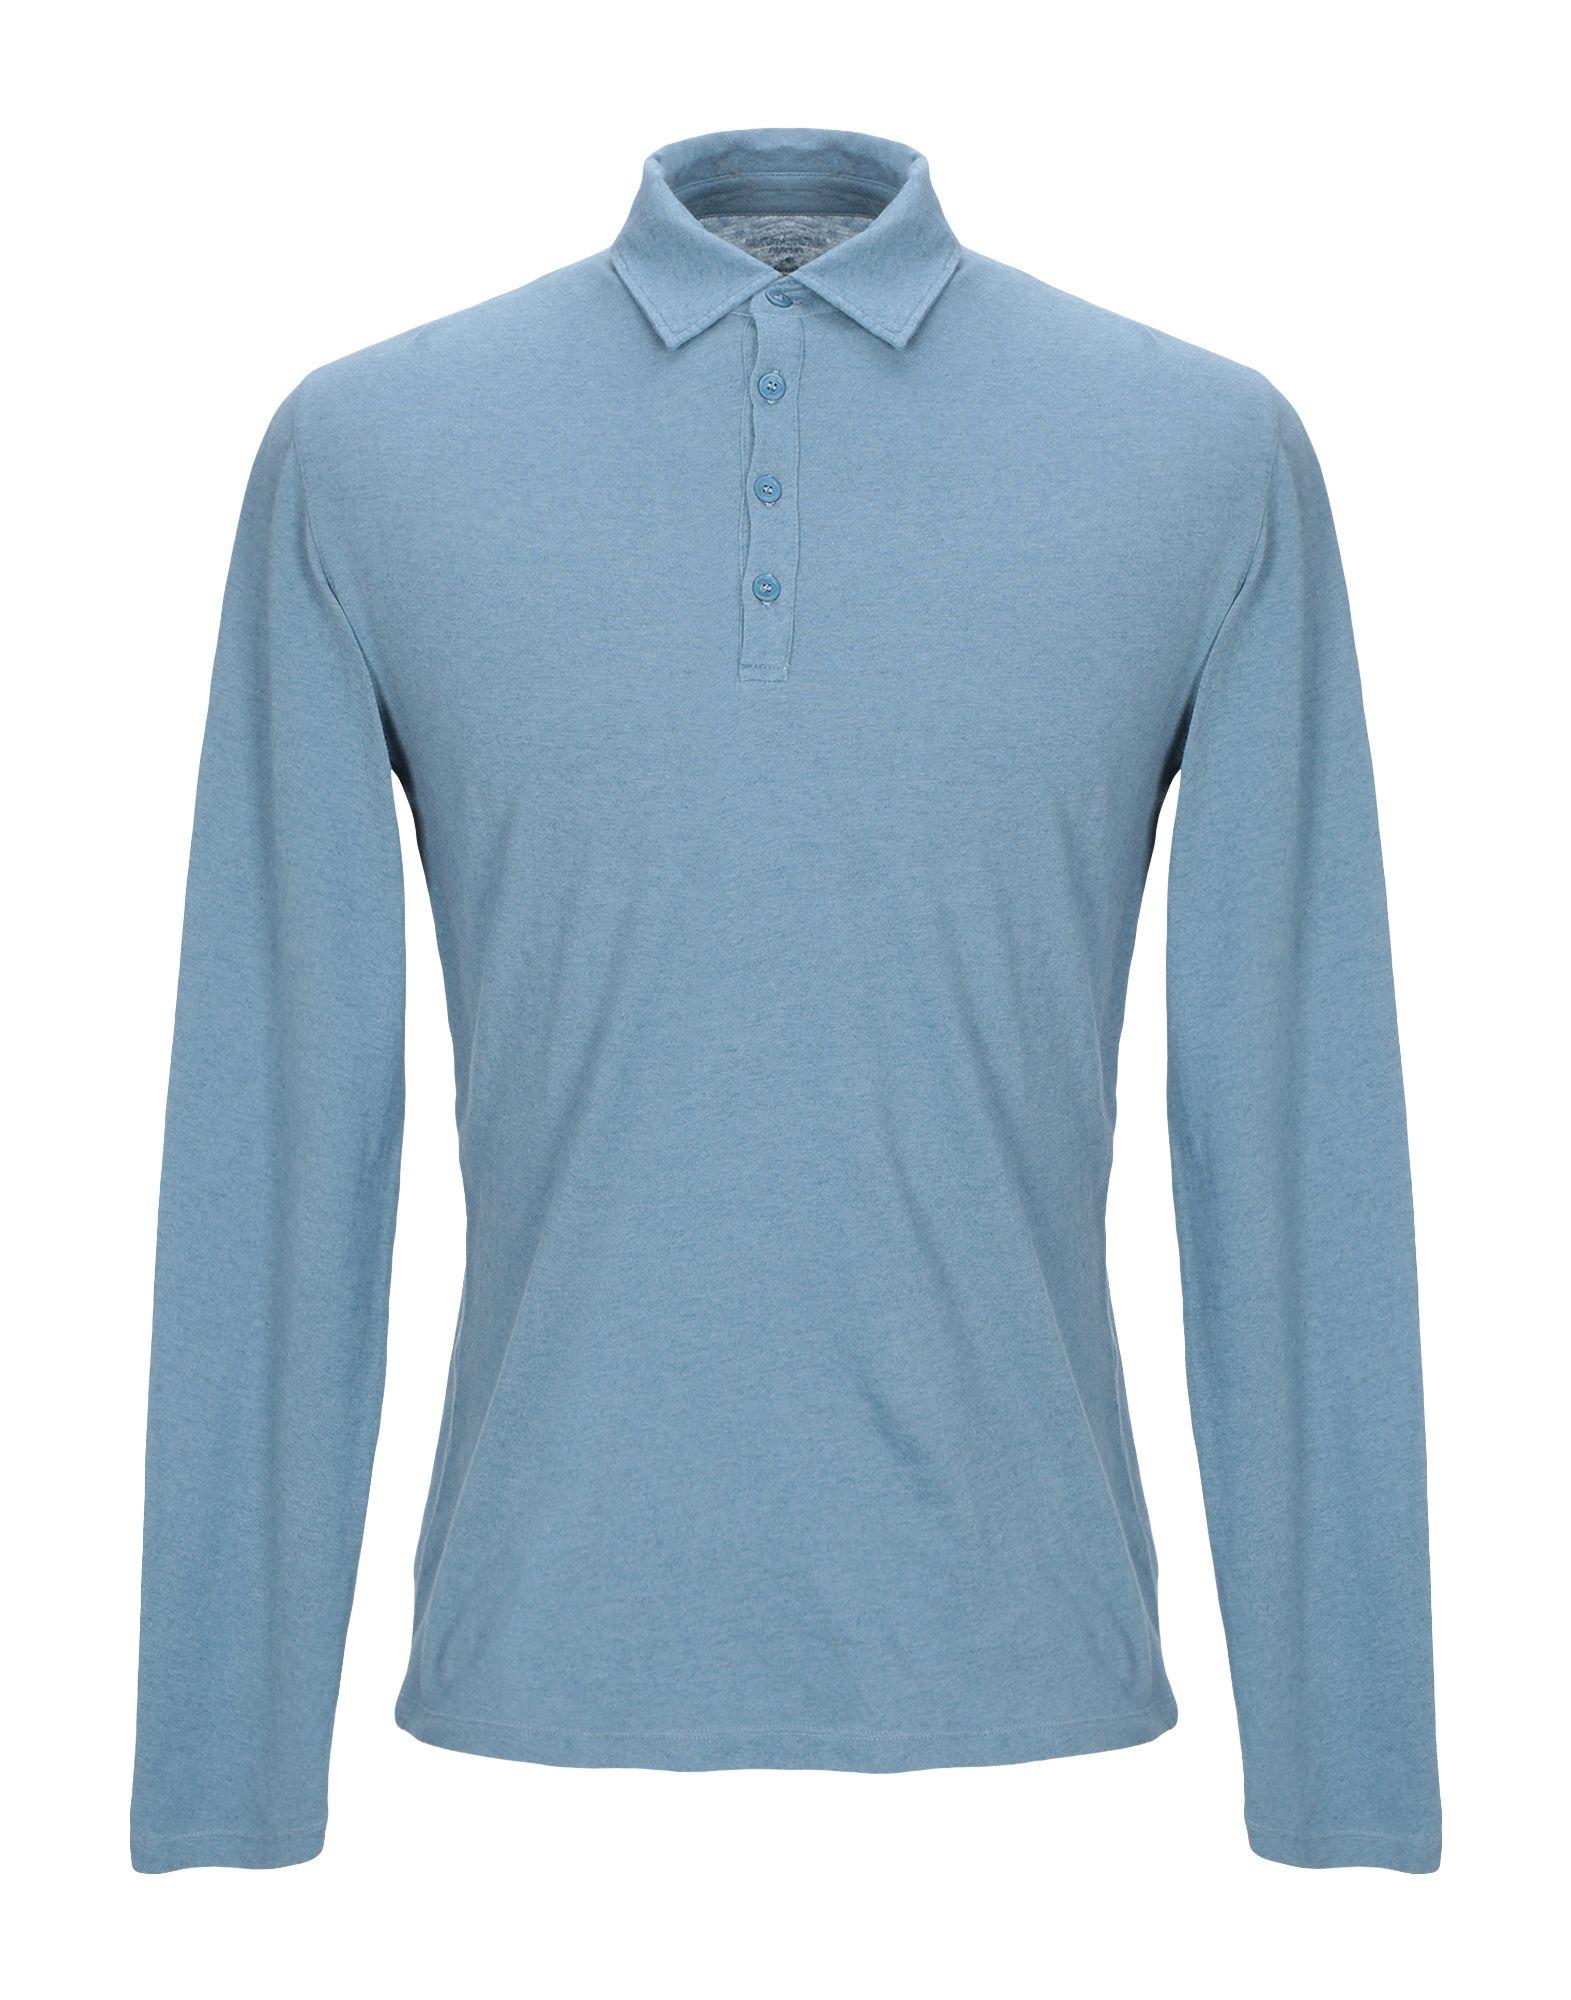 Majestic Filatures Cotton Polo Shirt in Pastel Blue (Blue) for Men - Lyst